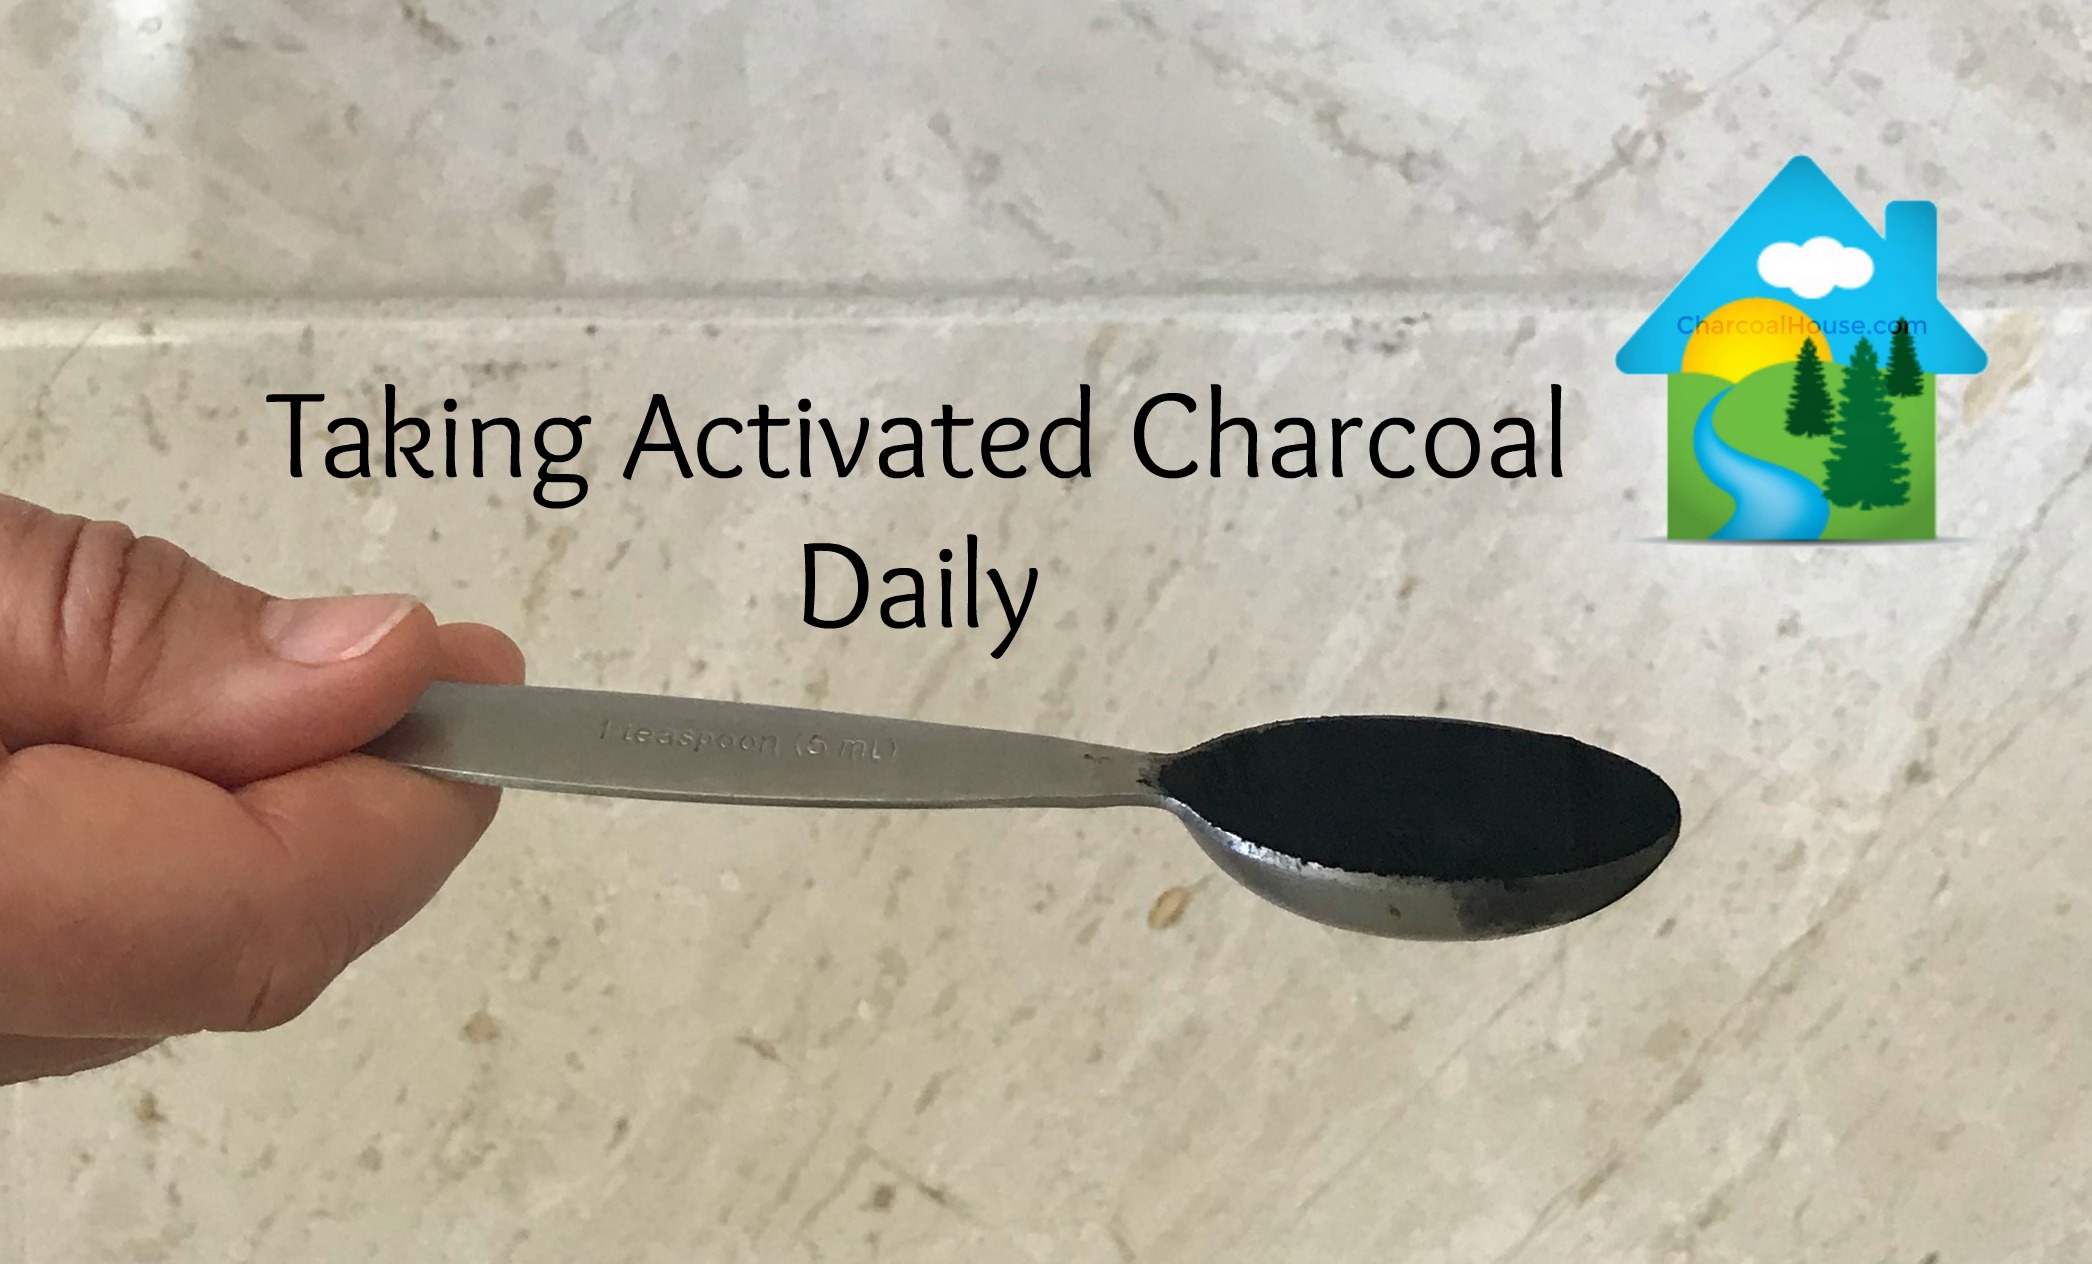 Taking Detox 1600 Activated Charcoal Daily - Taking Detox & Cleanse USP Activated Charcoal Powder Daily